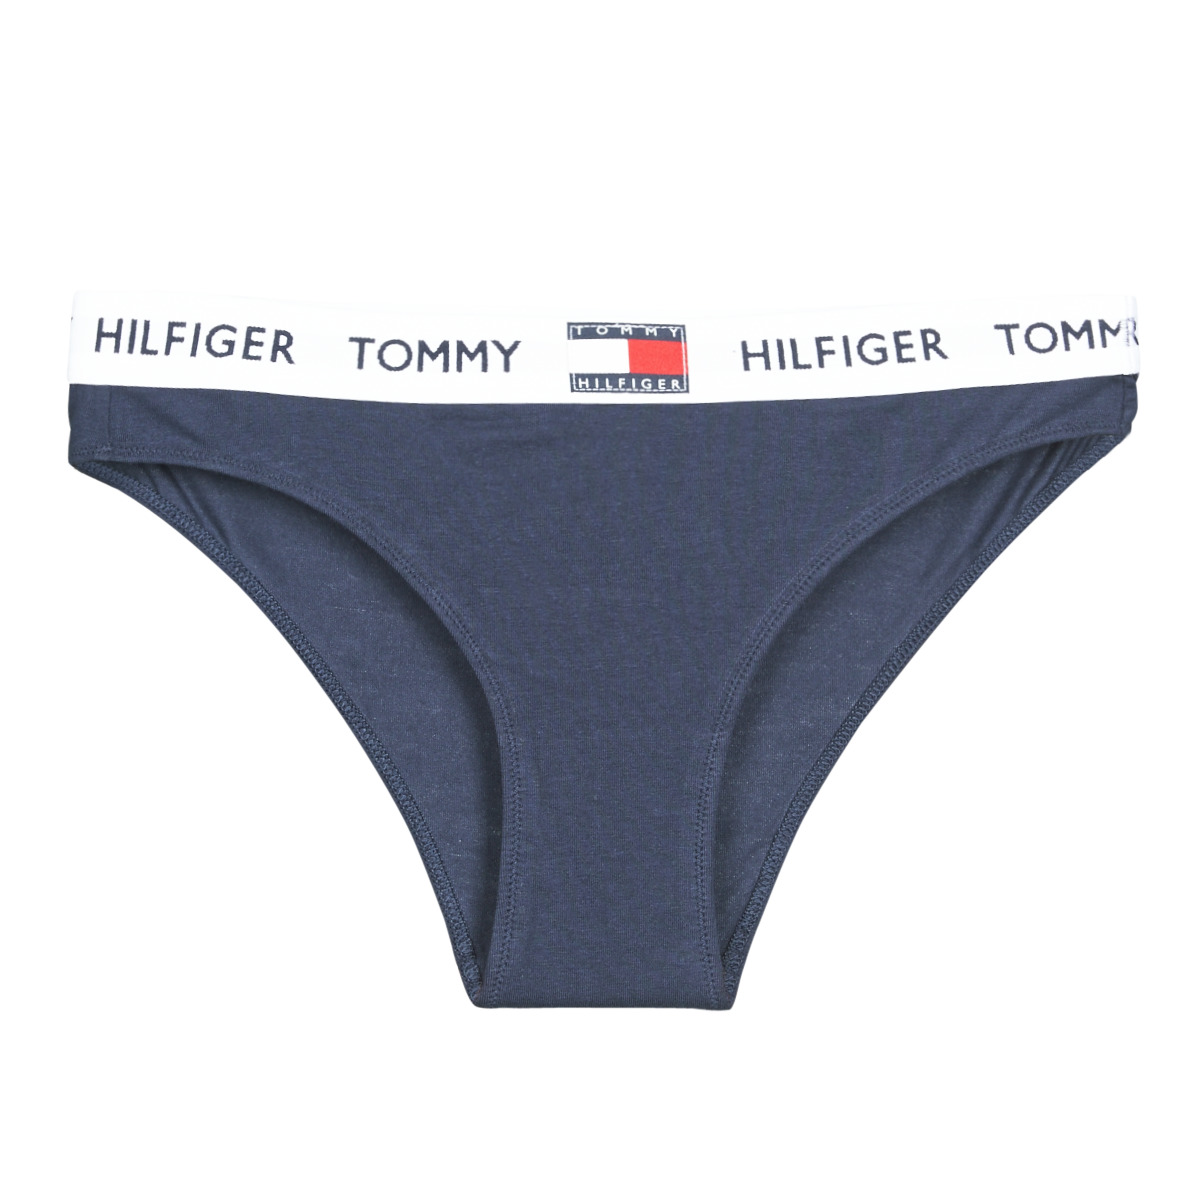 Tommy Hilfiger ORGANIC COTTON Marine - Fast delivery  Spartoo Europe ! -  Underwear Knickers/panties Women 19,20 €